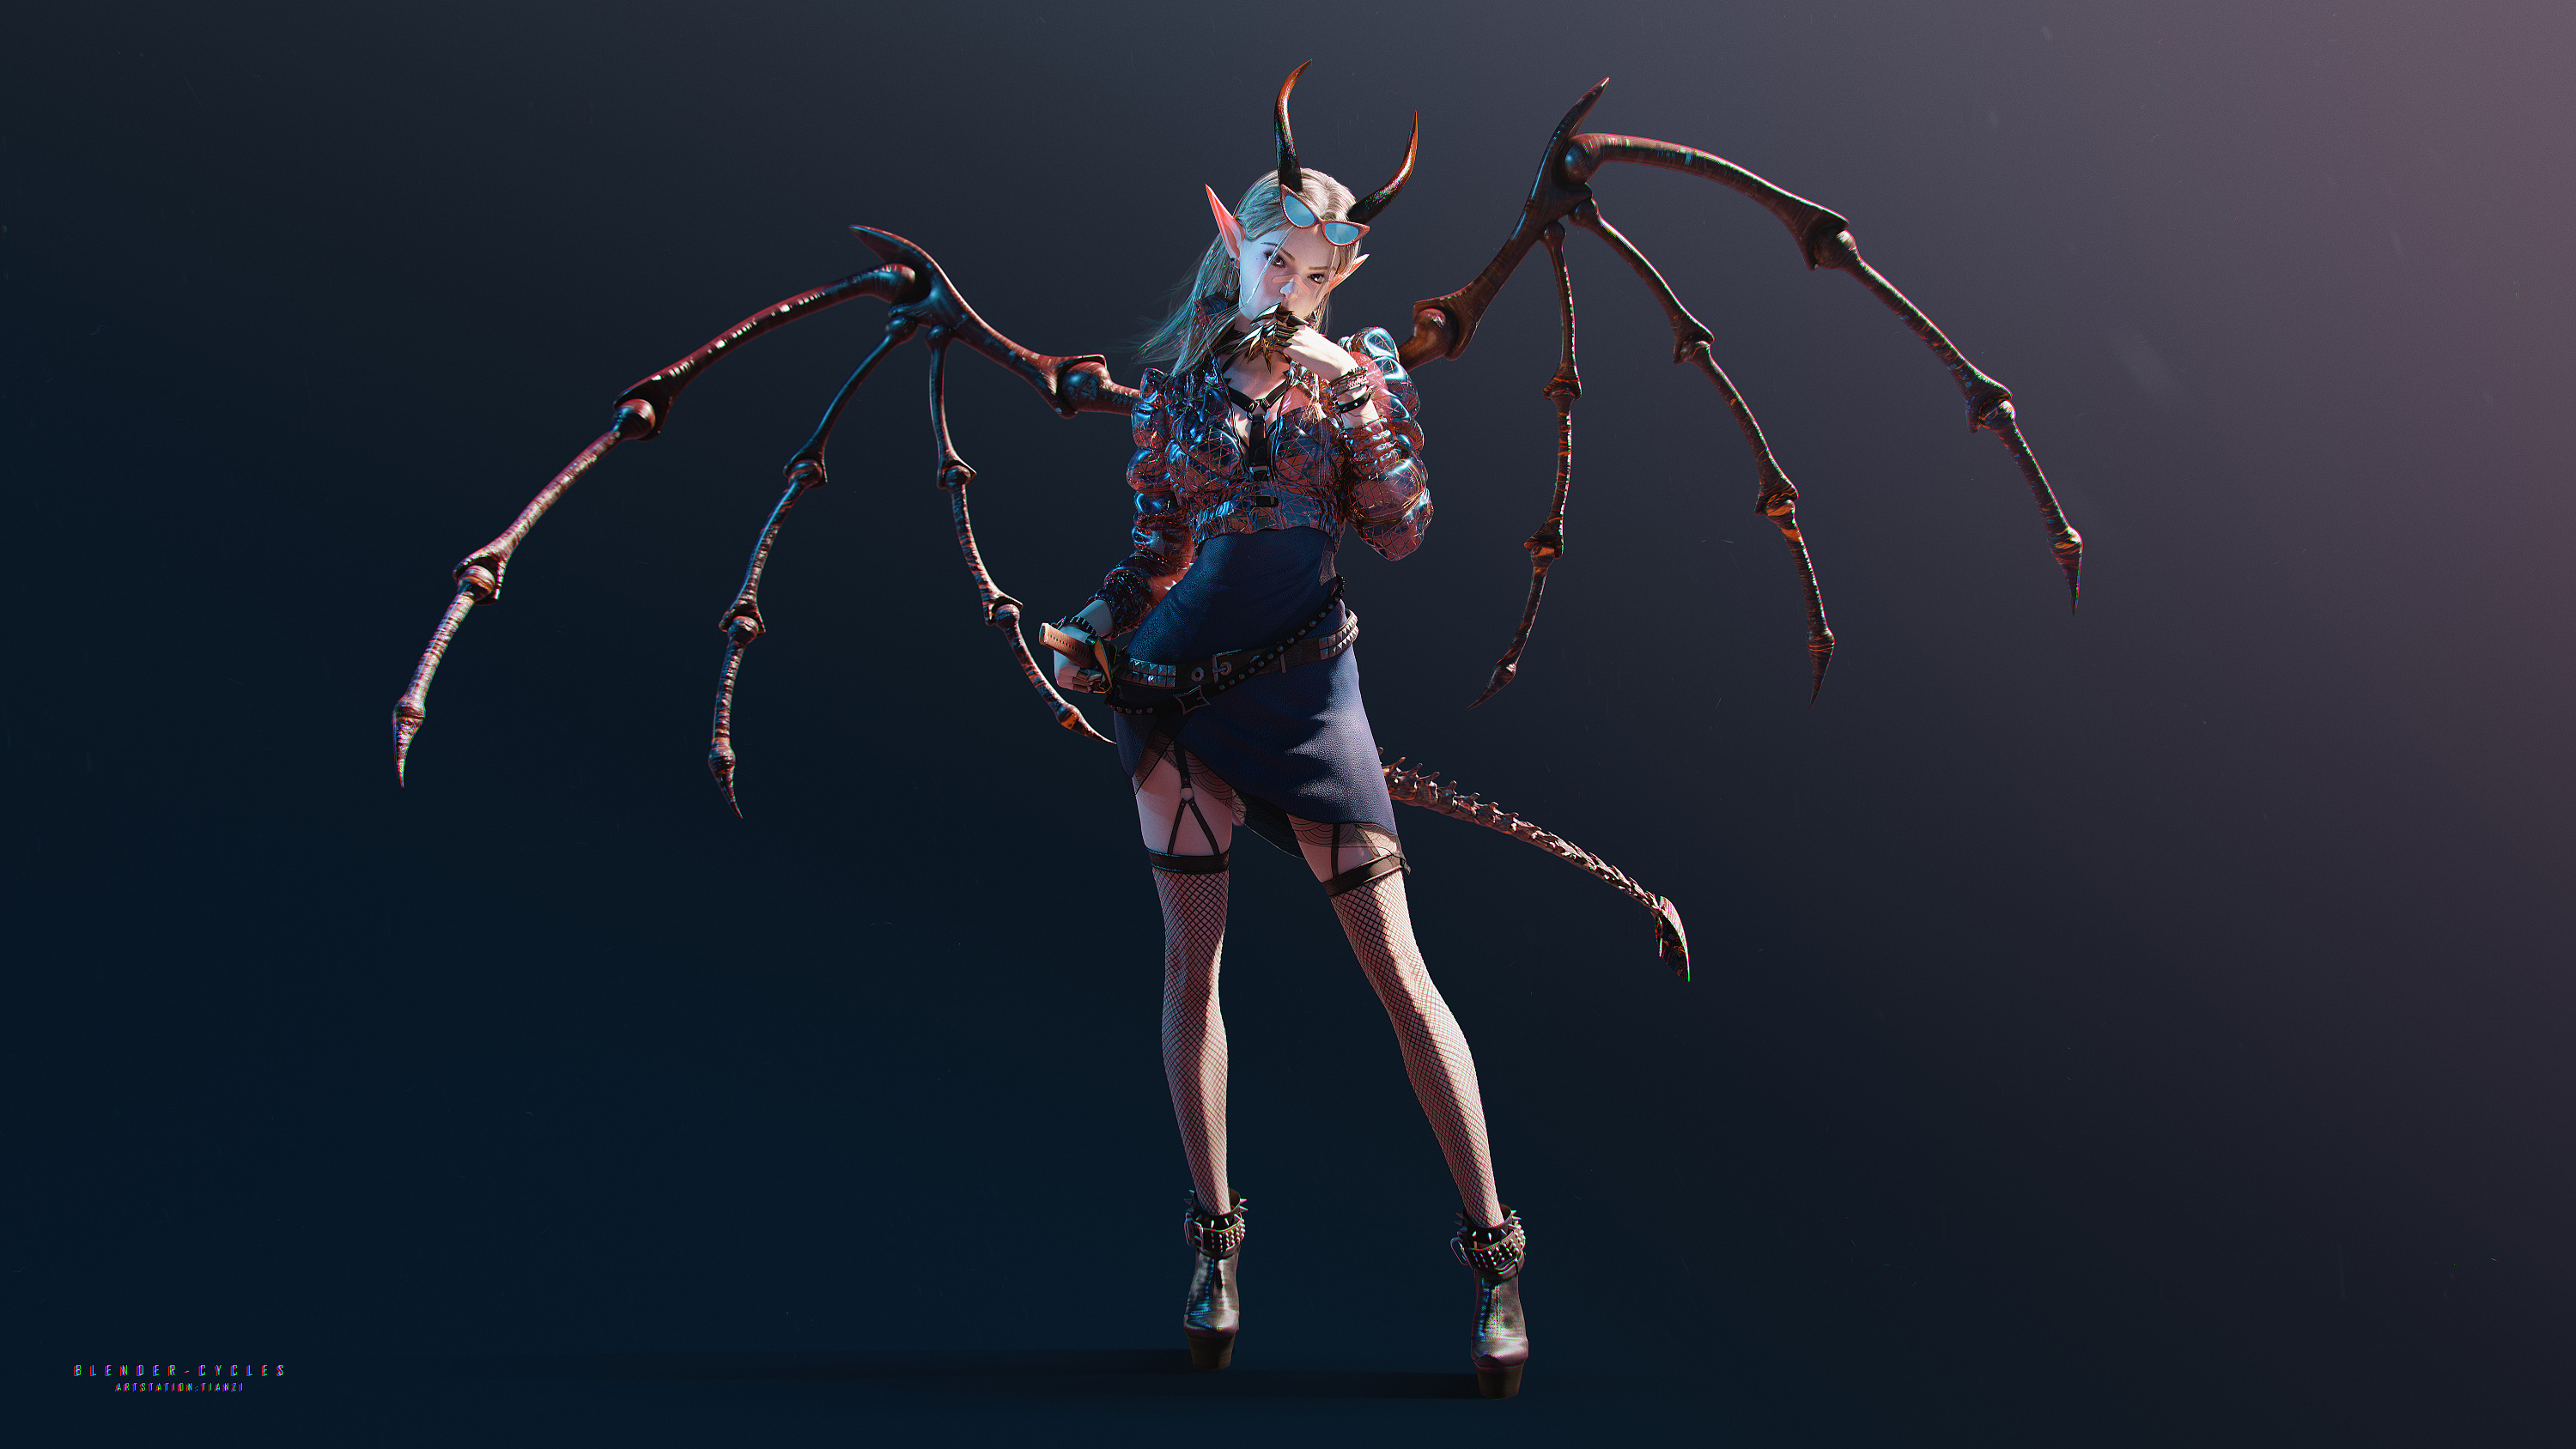 Anime 3000x1688 illustration video game characters fantasy girl women antlers simple background standing stockings fishnet stockings fantasy art pointy ears watermarked